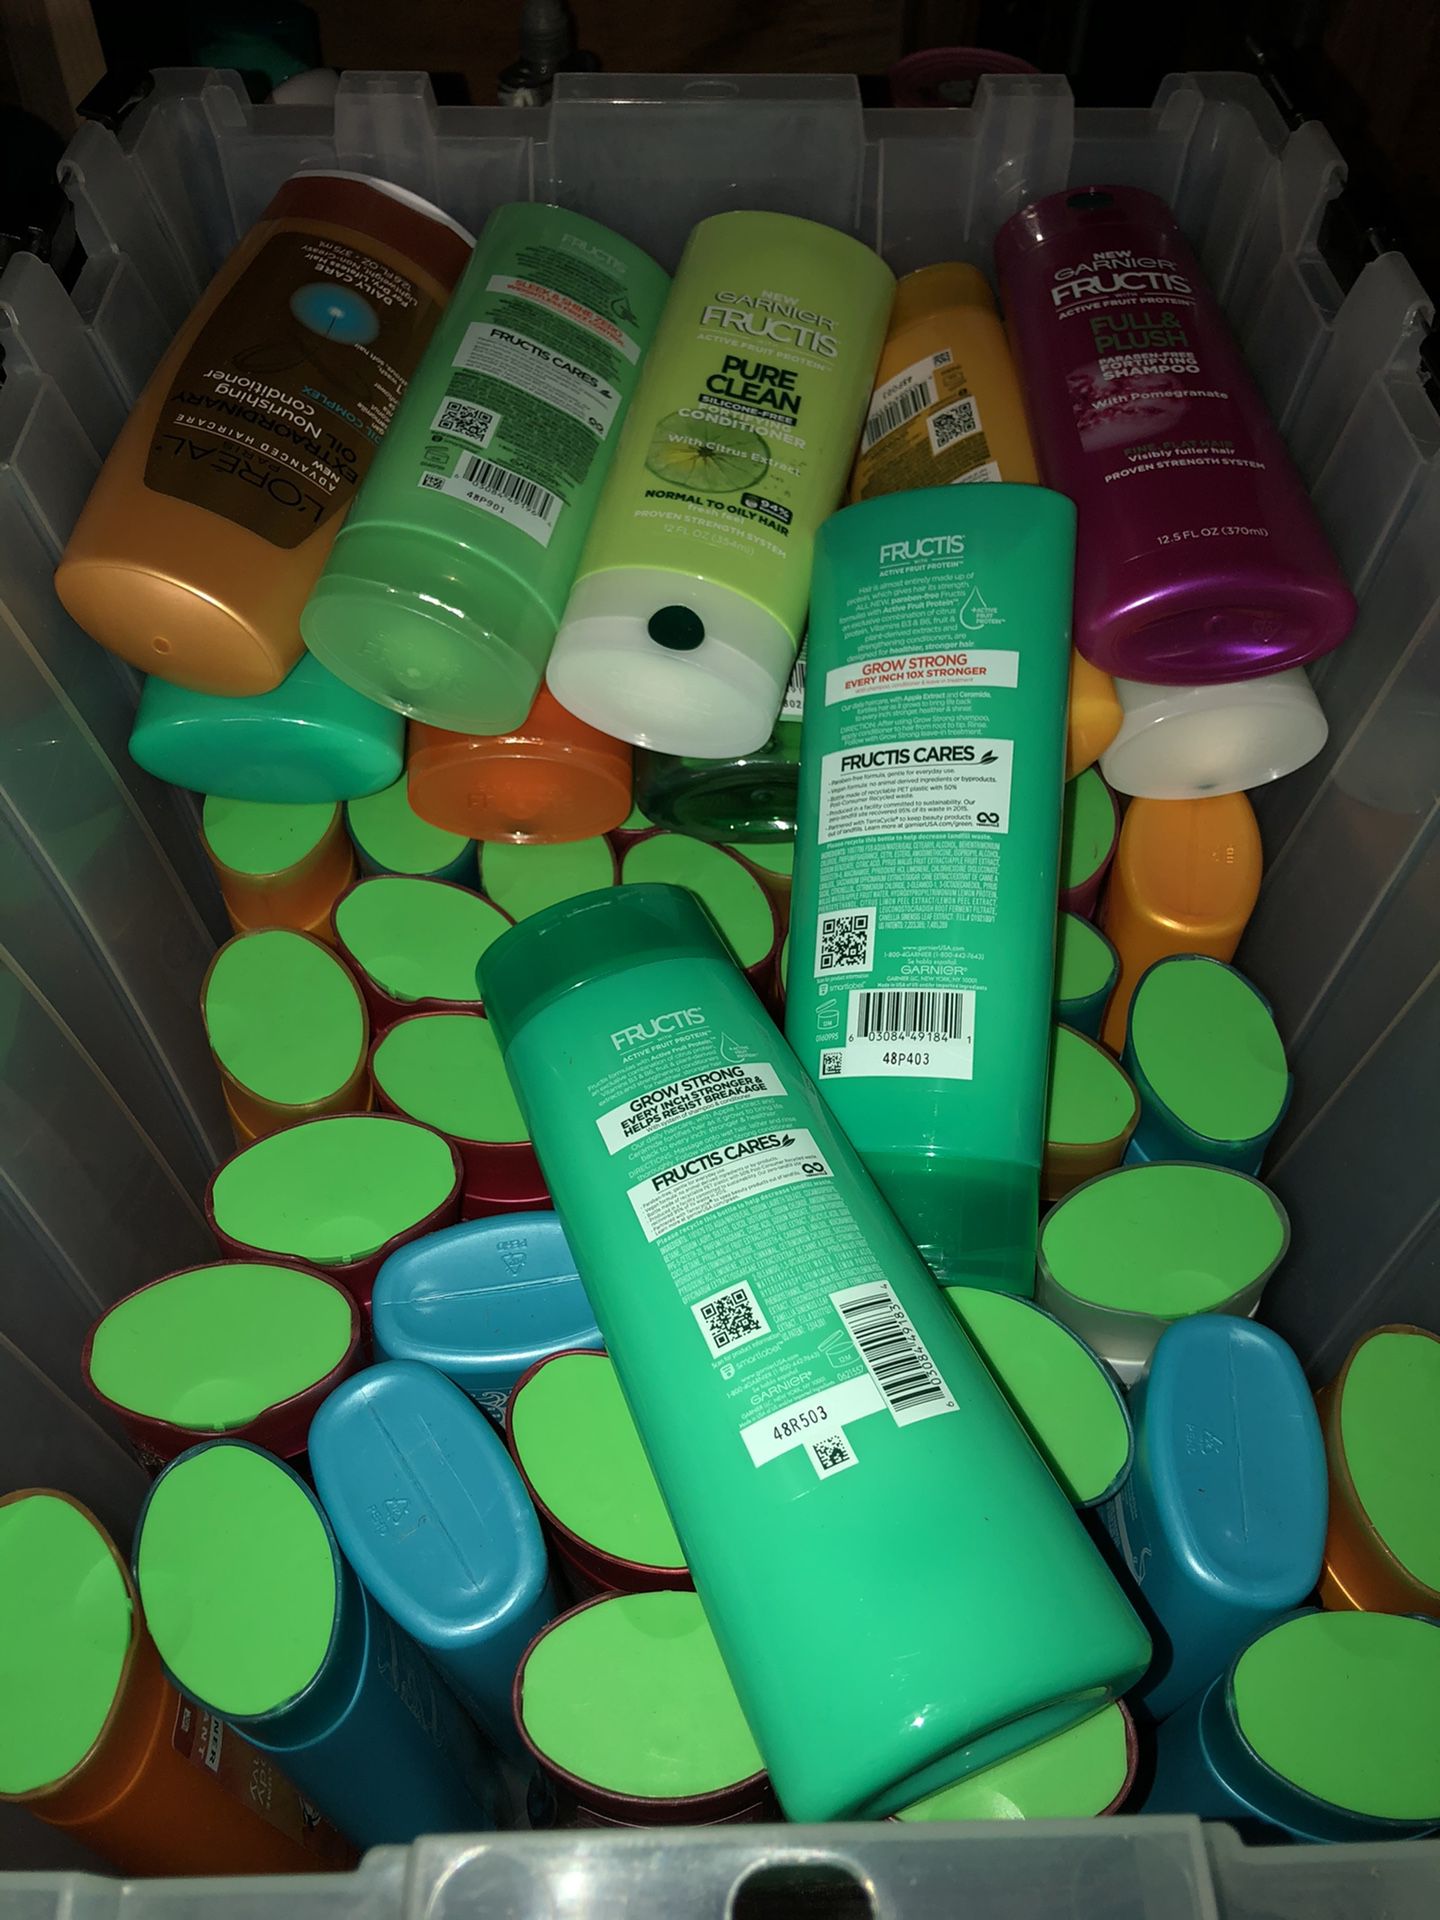 $1 EACH shampoo and conditioners LAST CHANCE!!! Valentine’s Day sale